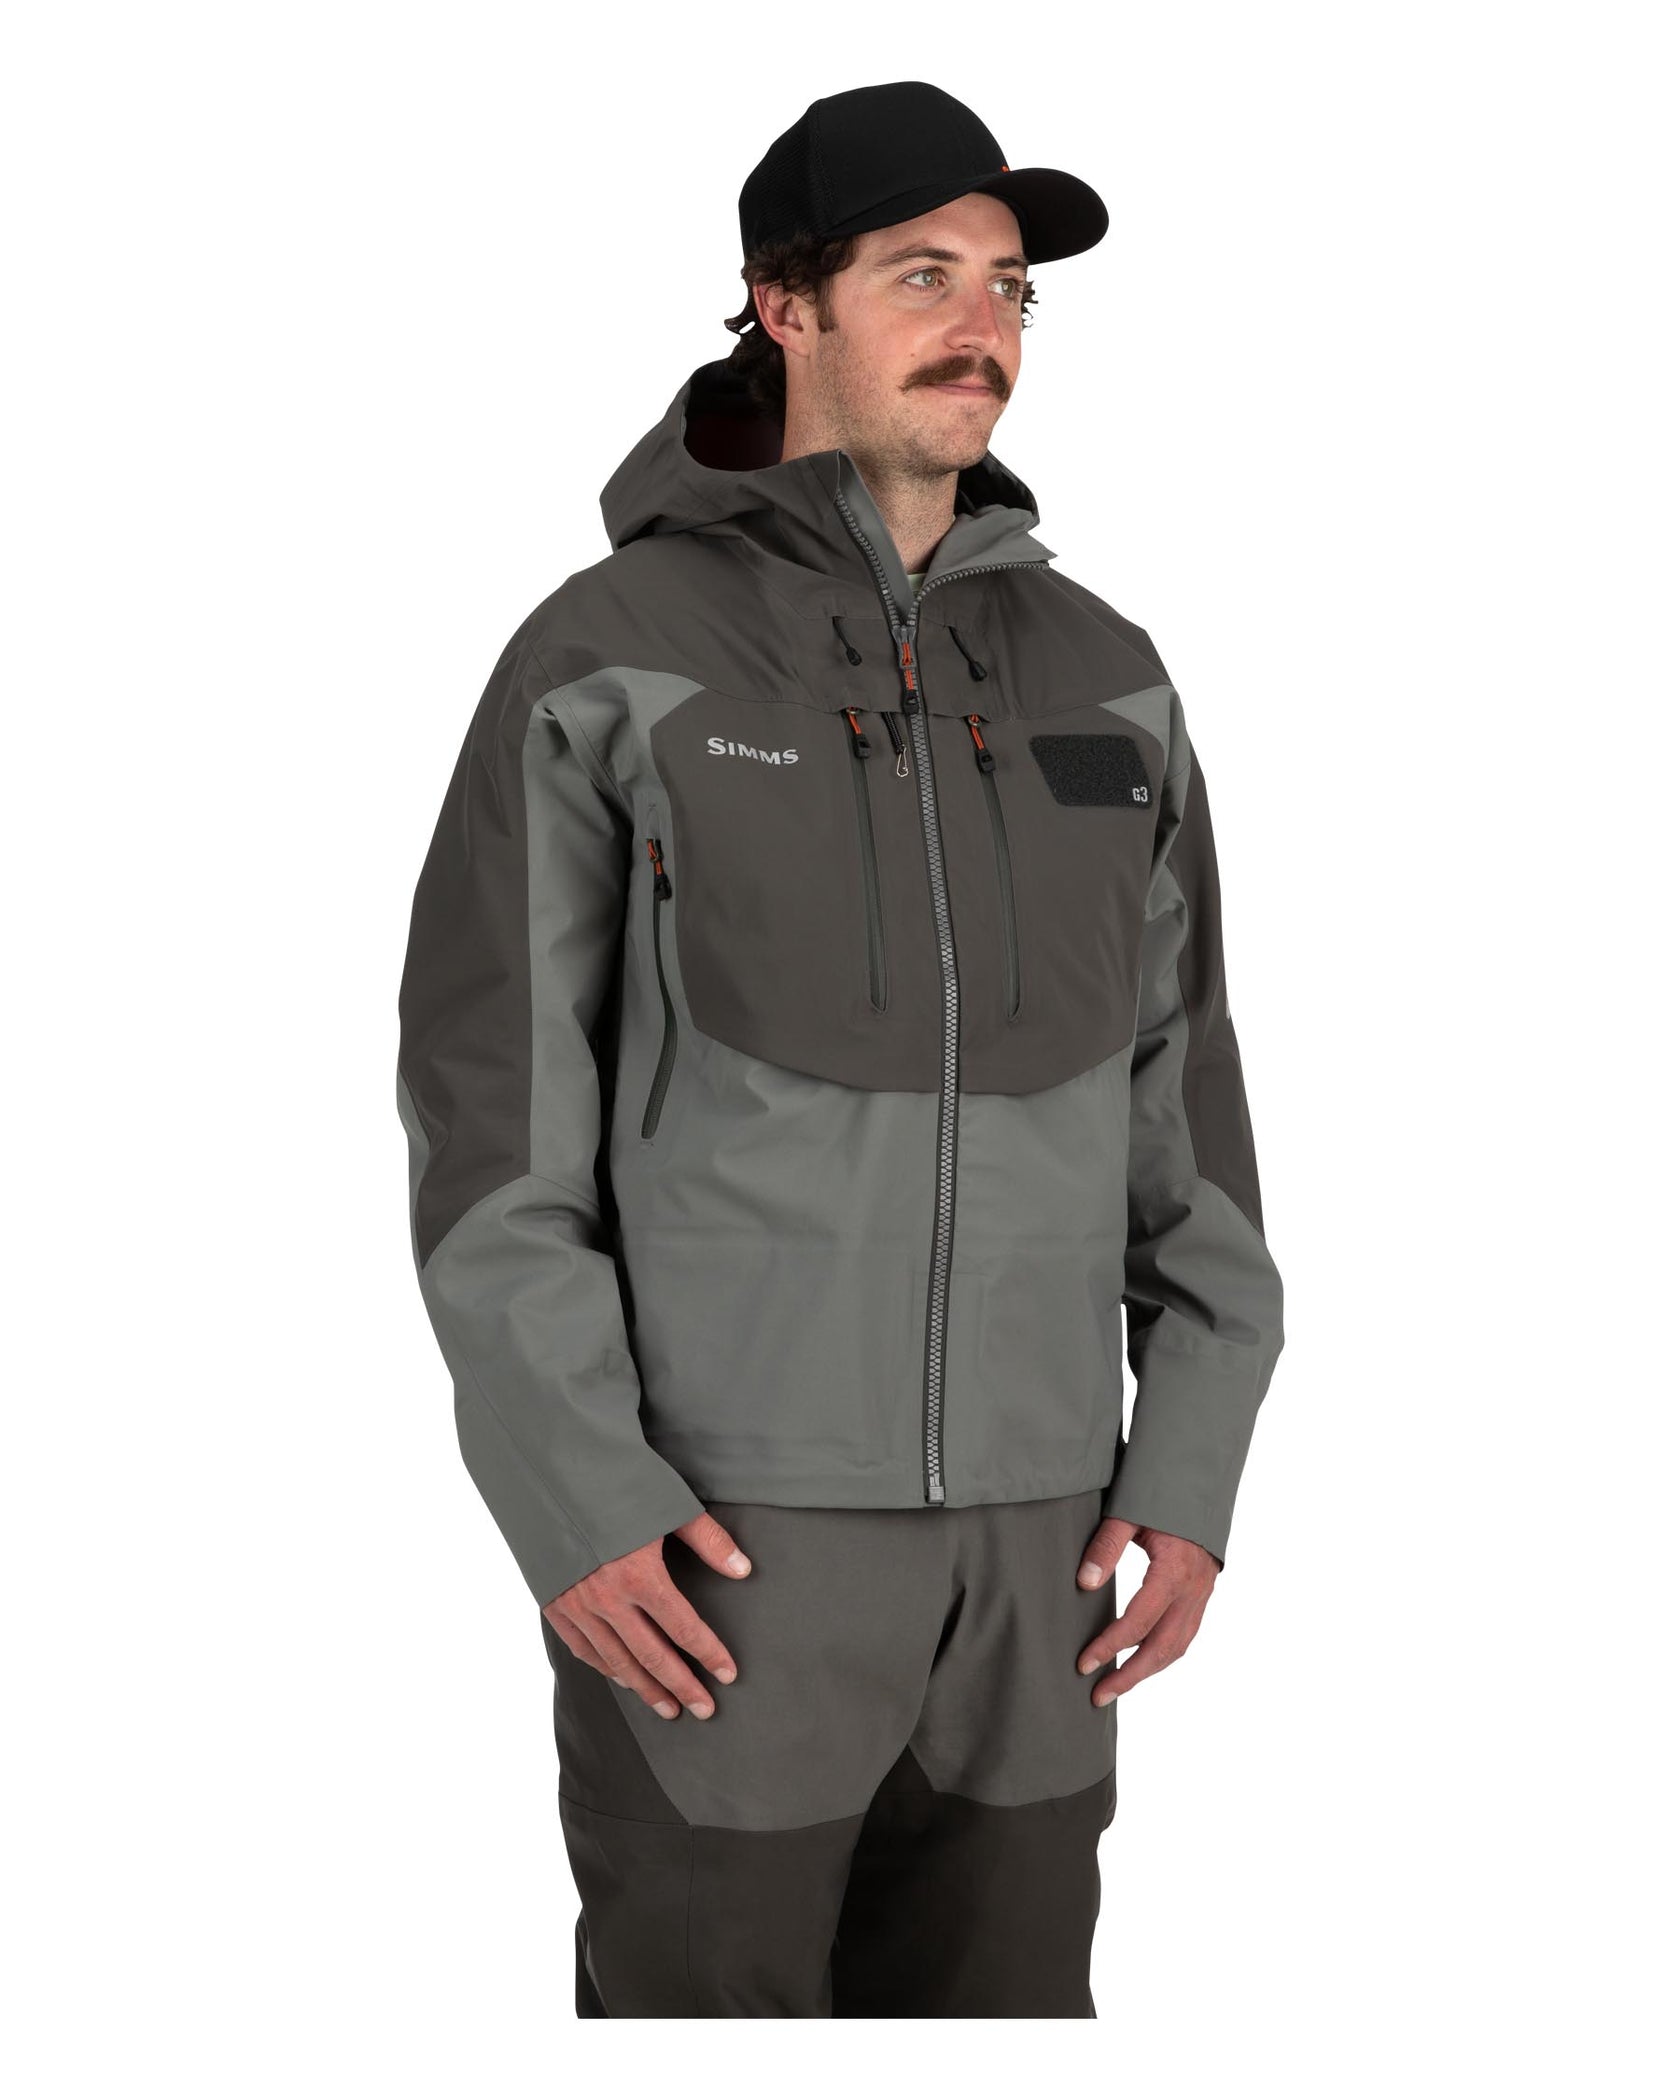 SIMMS G3 GUIDE WADING JACKET